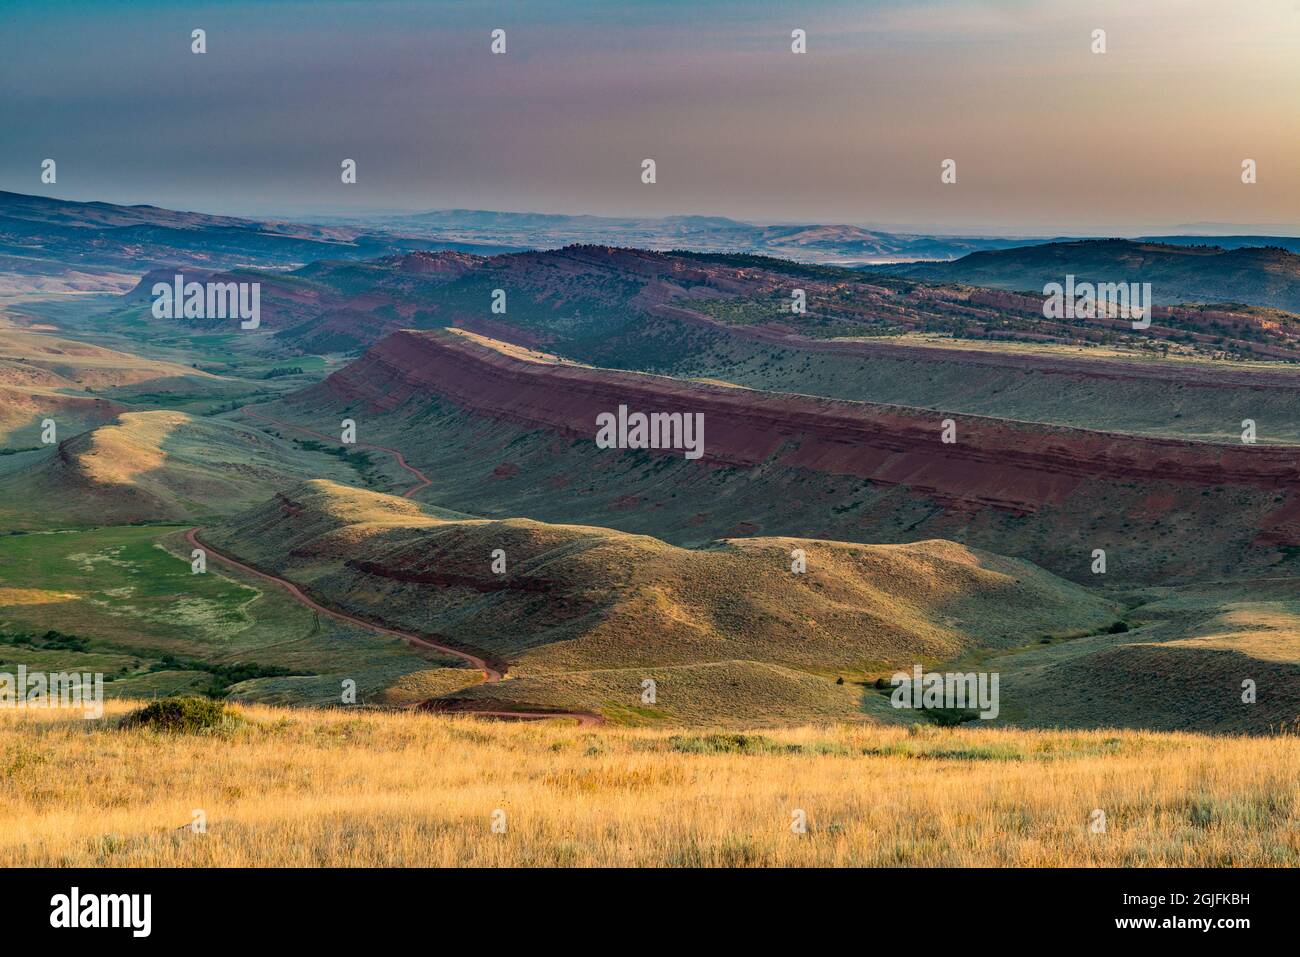 Red Canyon overlook near Lander is considered one of the most scenic highway vistas in Wyoming. Stock Photo